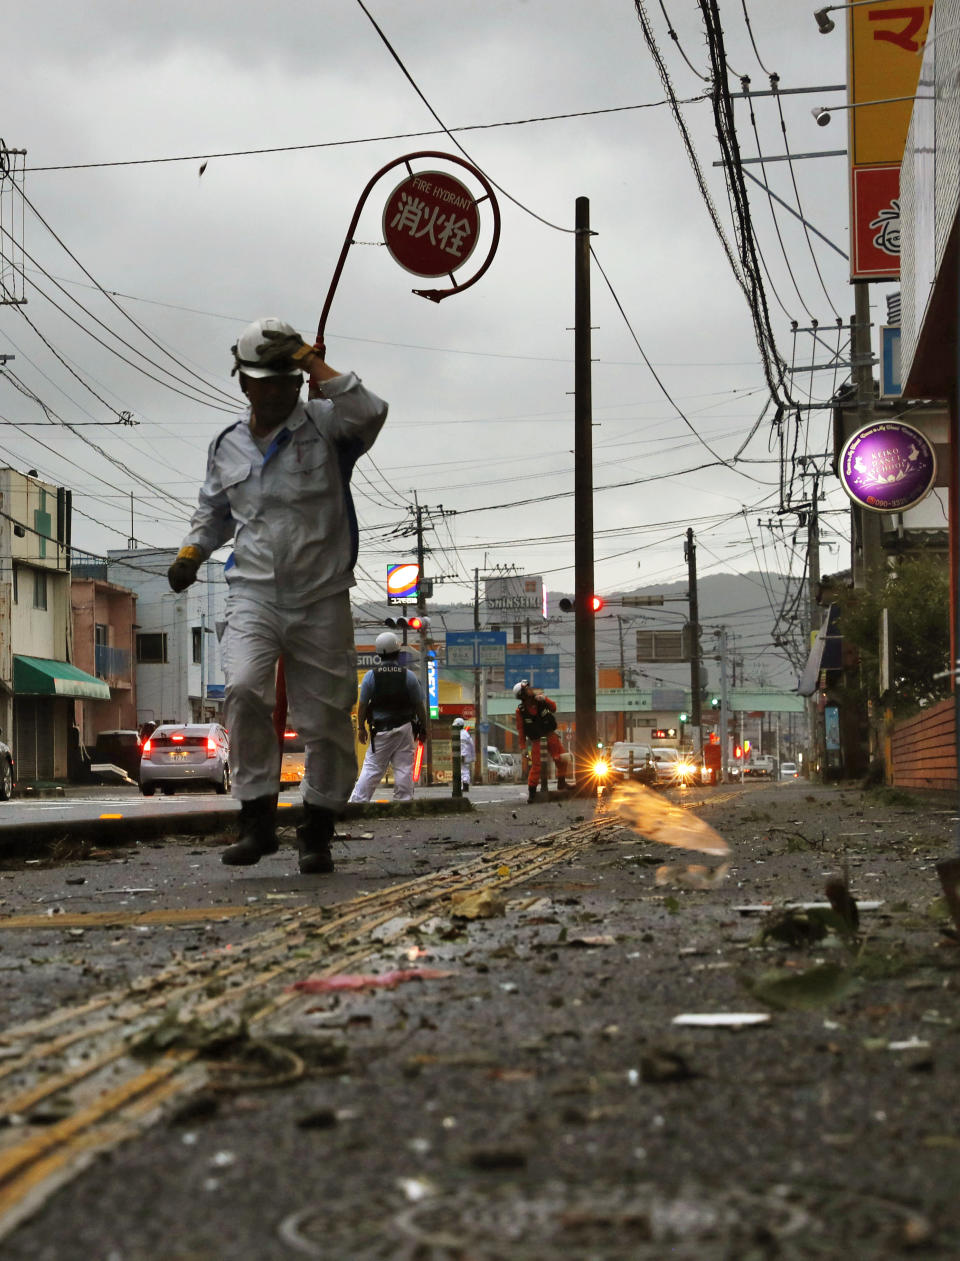 In this Sunday, Sept. 22, 2019, photo, police control the traffic after strong winds brought about by Typhoon Tapah swept Nobeoka, Miyazaki prefecture, southwestern Japan. The powerful typhoon lashed parts of Japan's southern islands with heavy rains and winds that caused flooding and some minor injuries. (Takuto Kaneko/Kyodo News via AP)